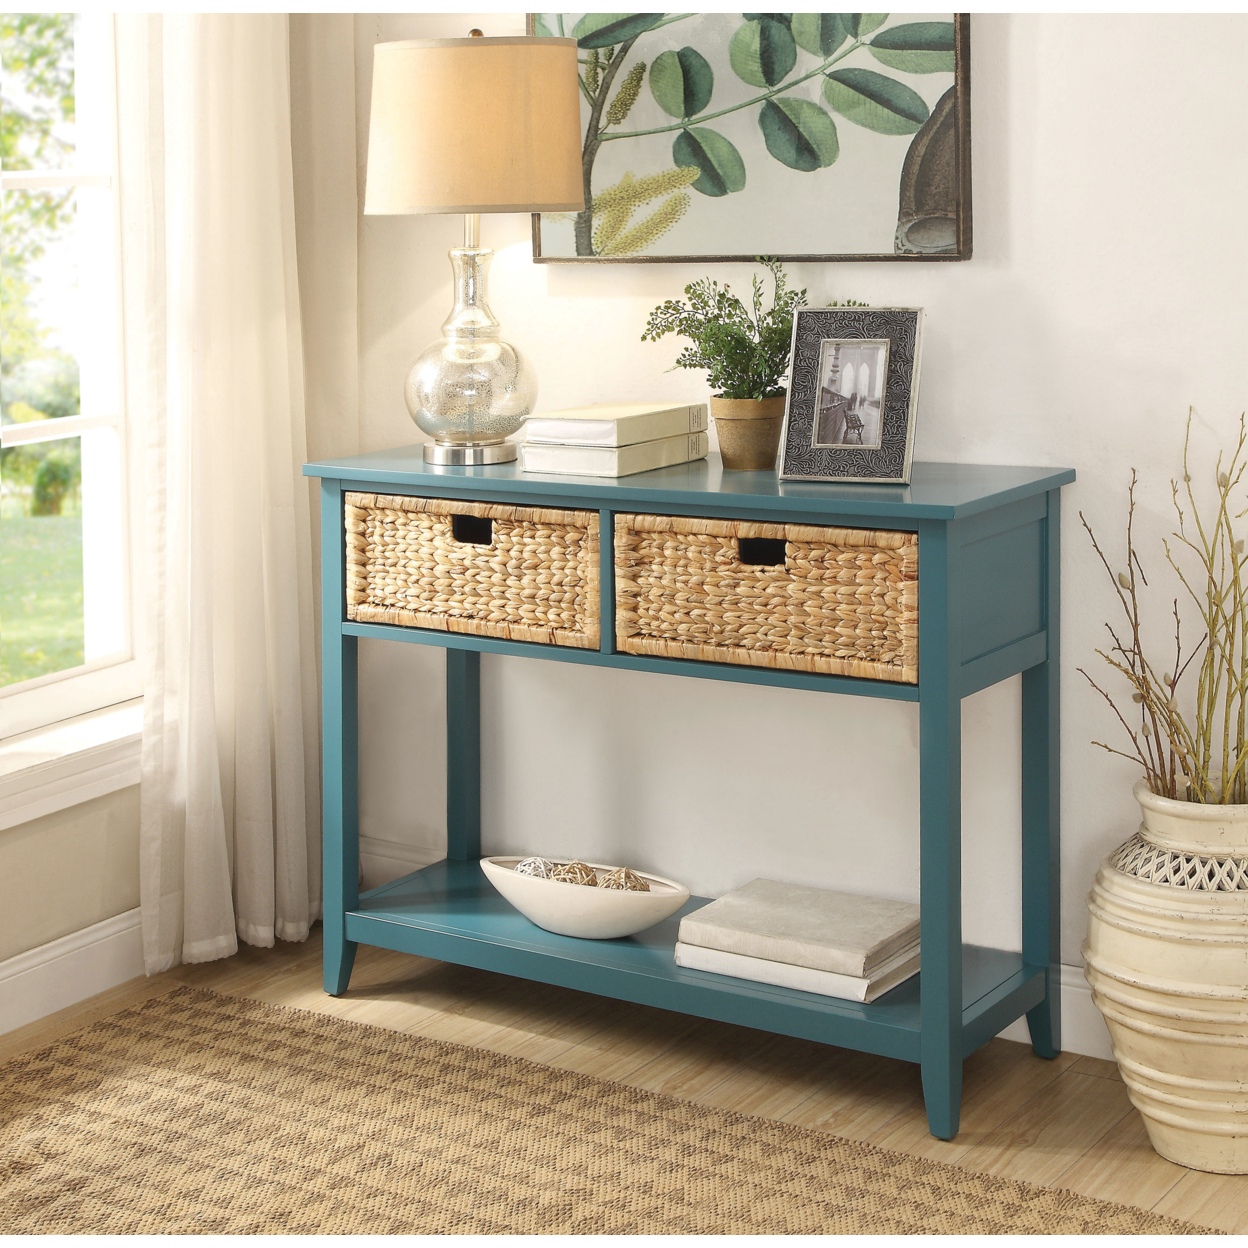 Flavius Console Table With 2 Drawers, Blue- Saltoro Sherpi